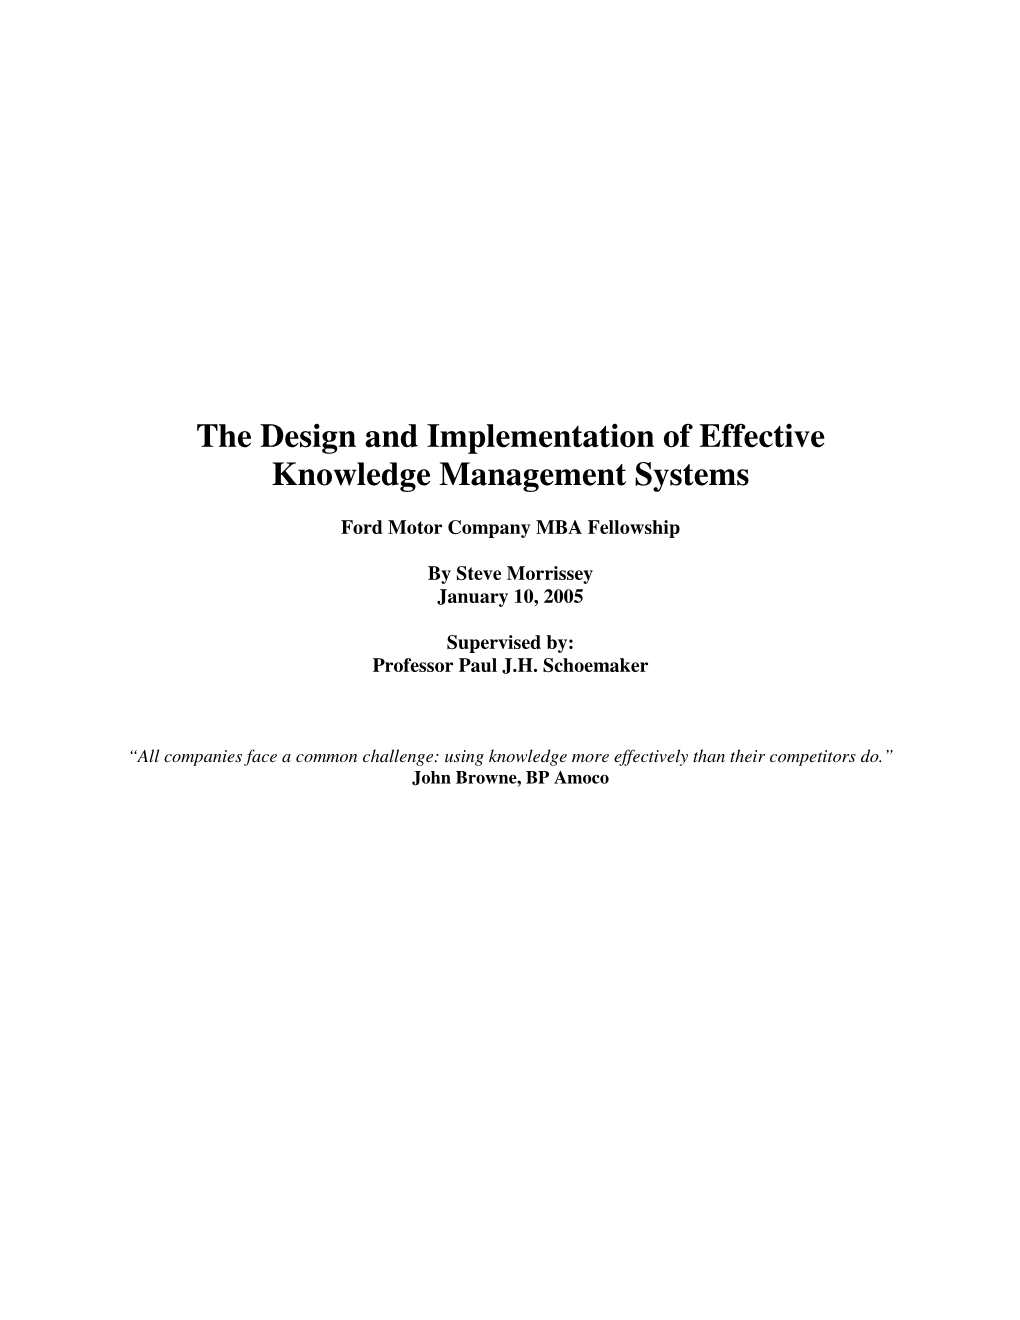 The Design and Implementation of Effective Knowledge Management Systems